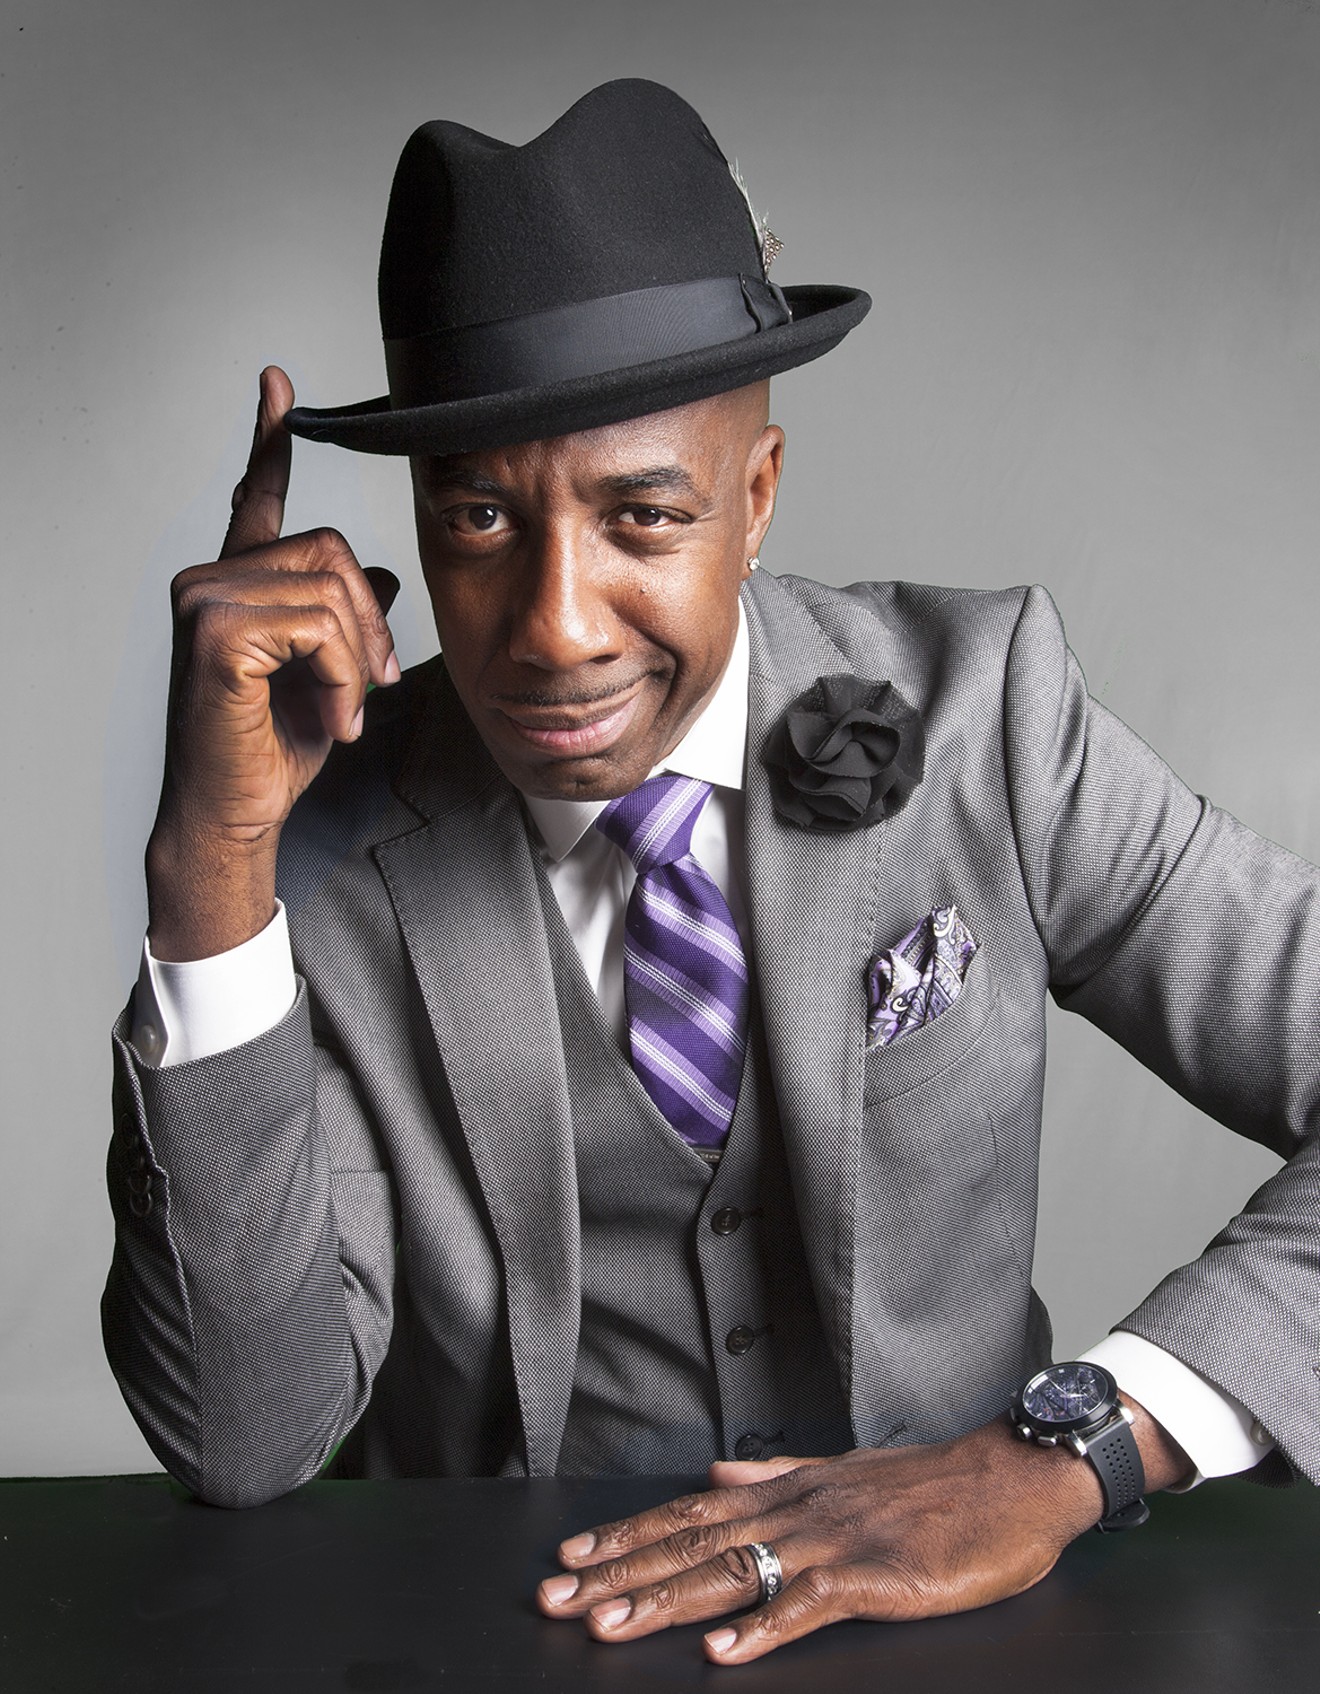 Comedian J.B. Smoove is coming to Dallas this Saturday.